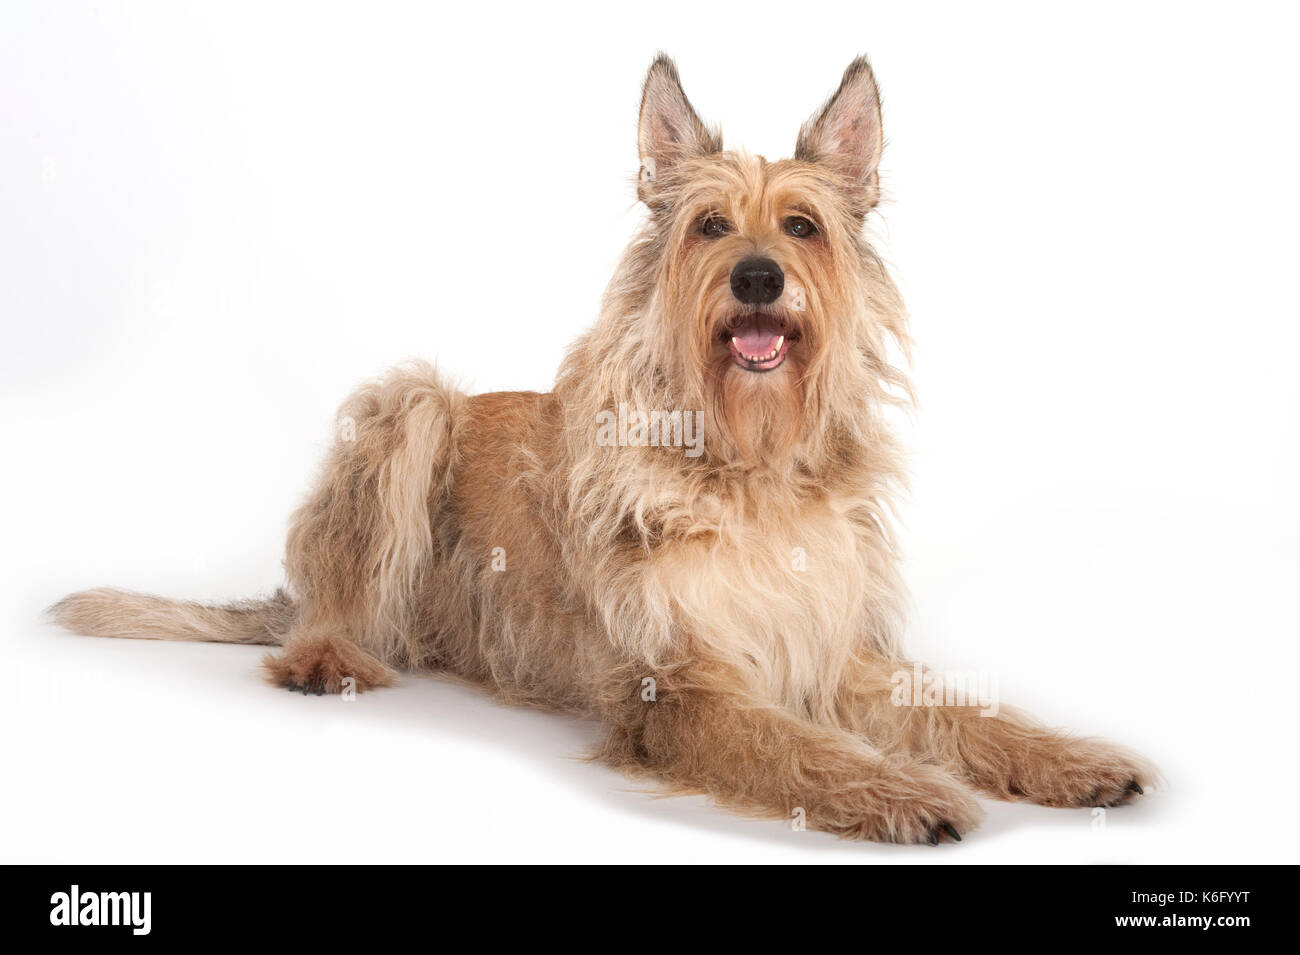 Berger Picard Dog, Laying Down, Studio, White Background Stock Photo